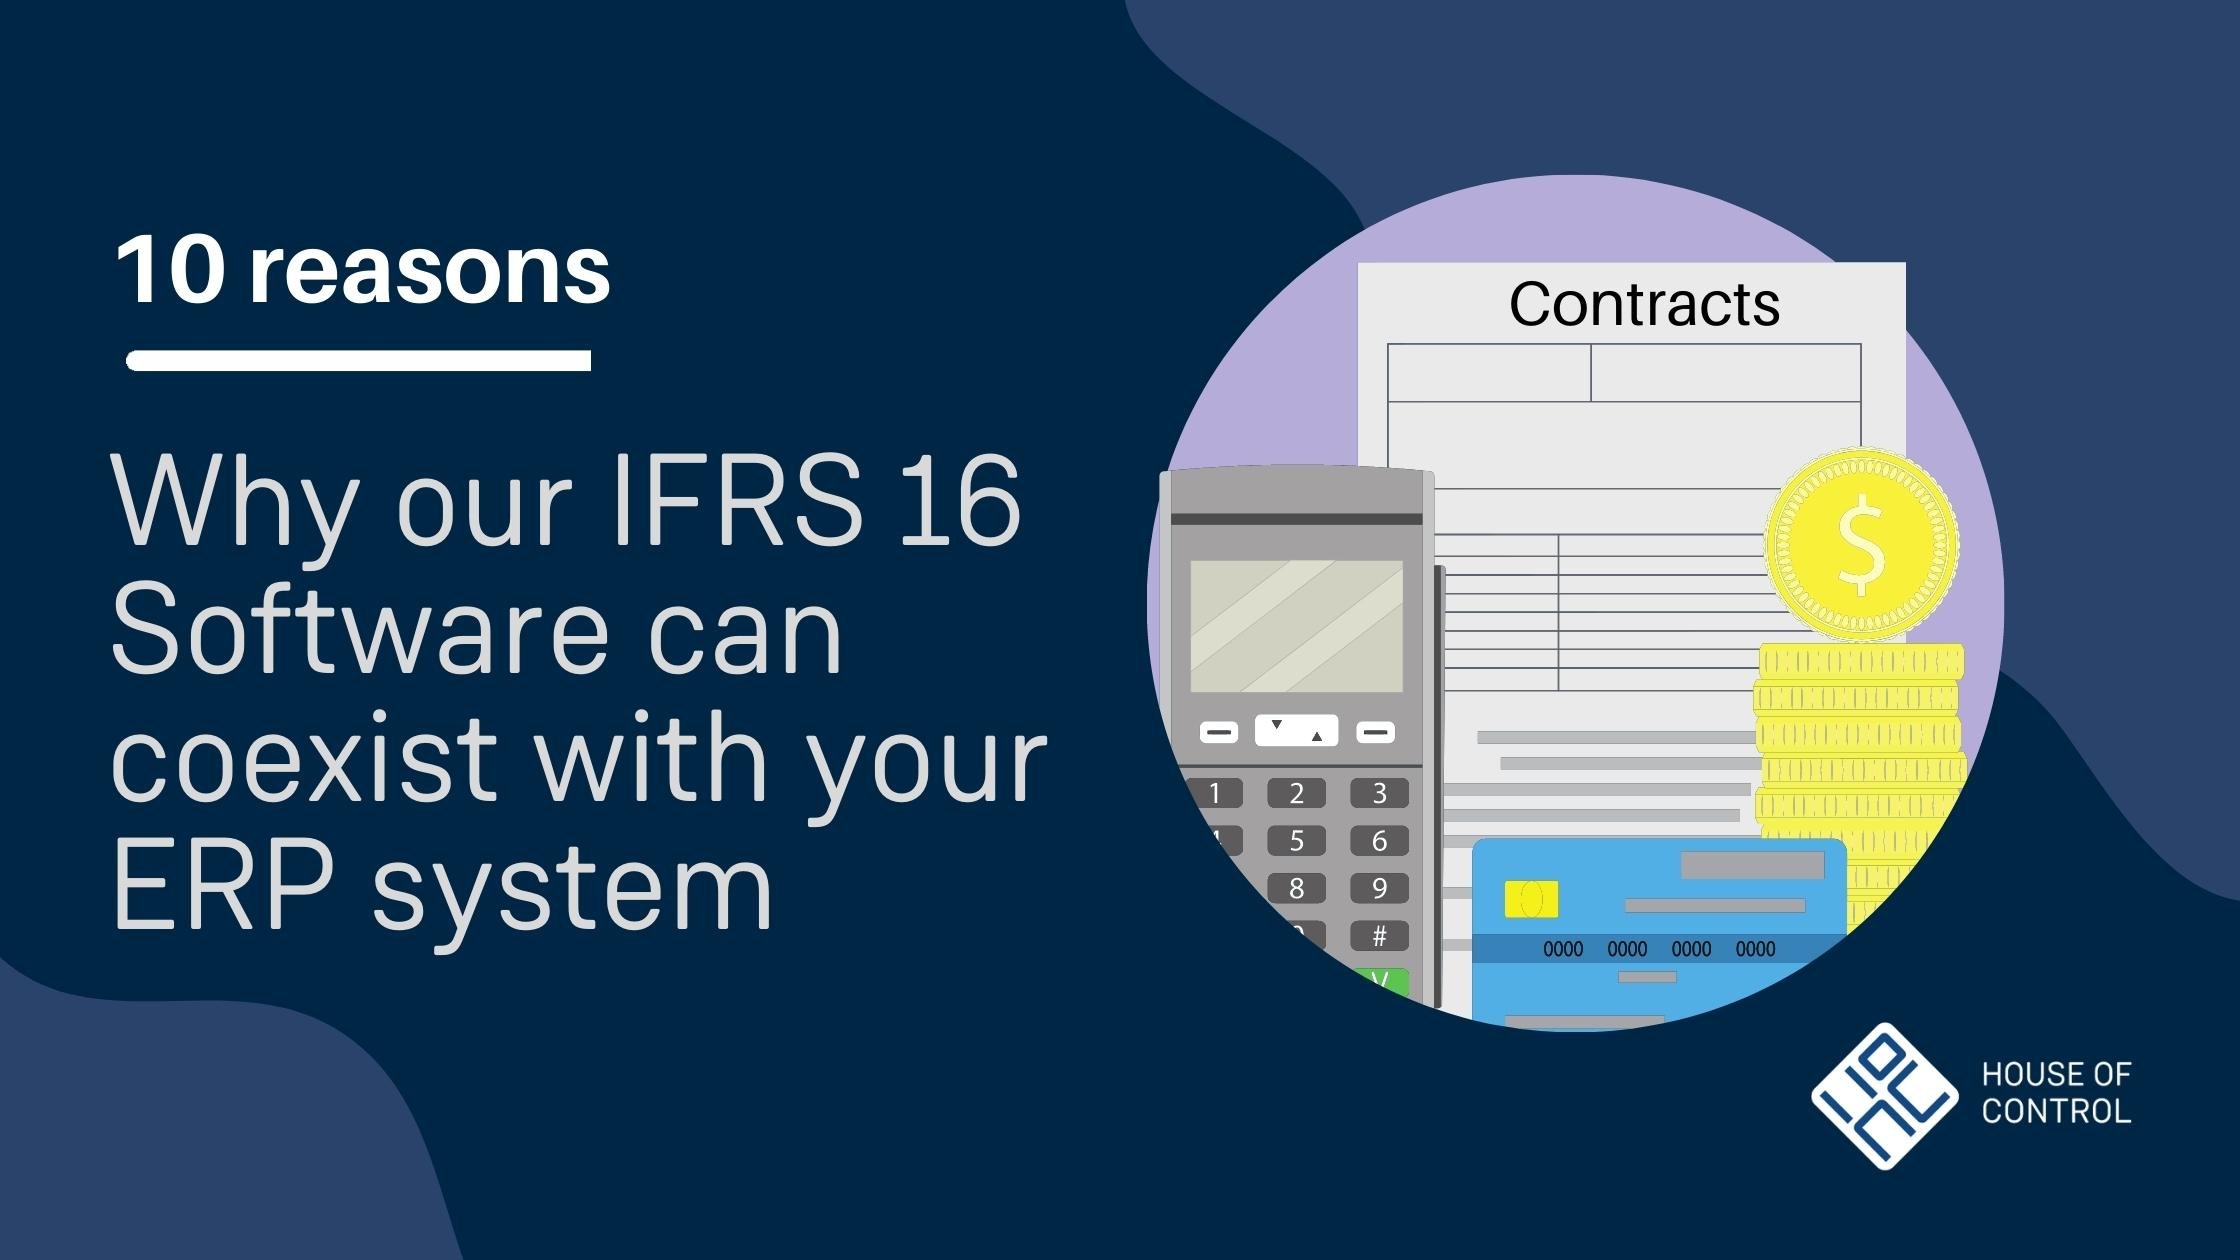 10 reasons Why IFRS 16 Software can coexist with your ERP system 2